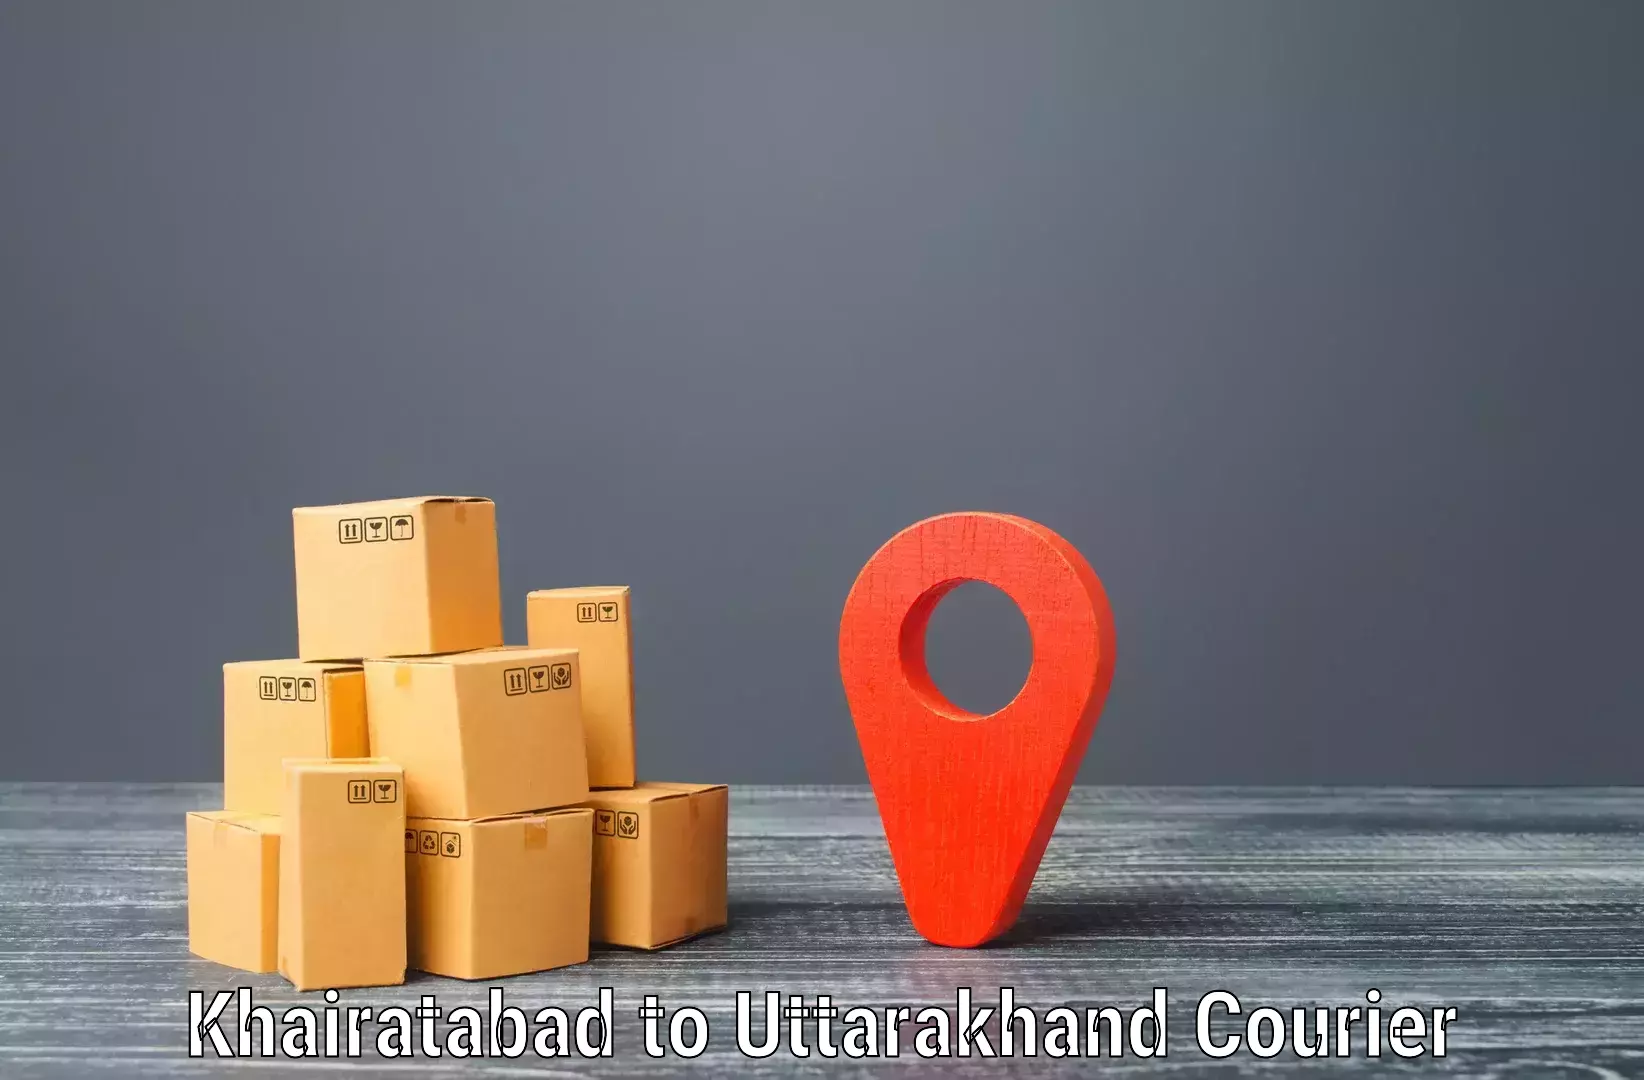 Automated parcel services Khairatabad to Haridwar